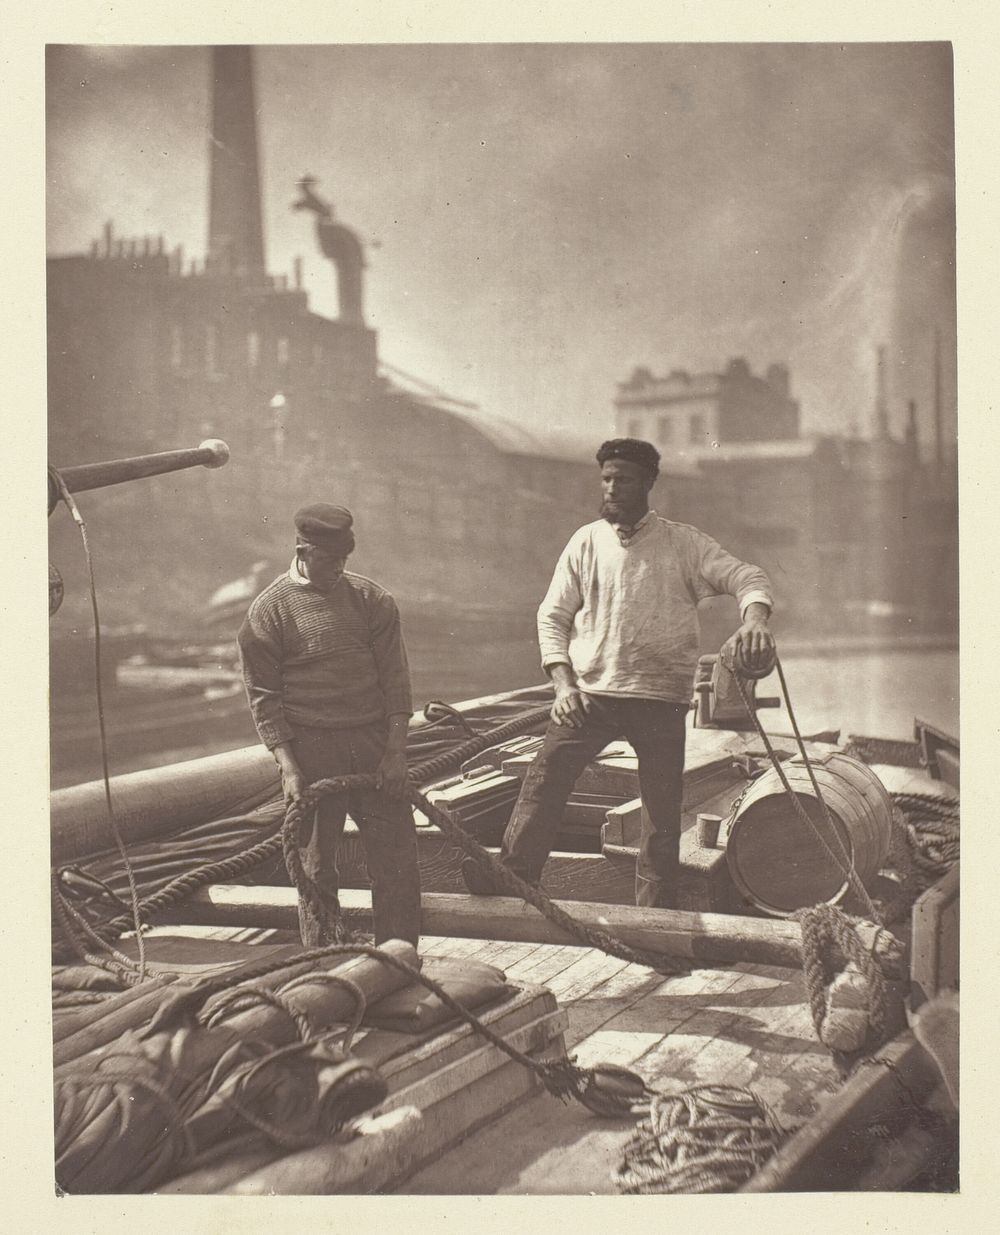 Workers on the "Silent Highway" by John Thomson (Photographer)